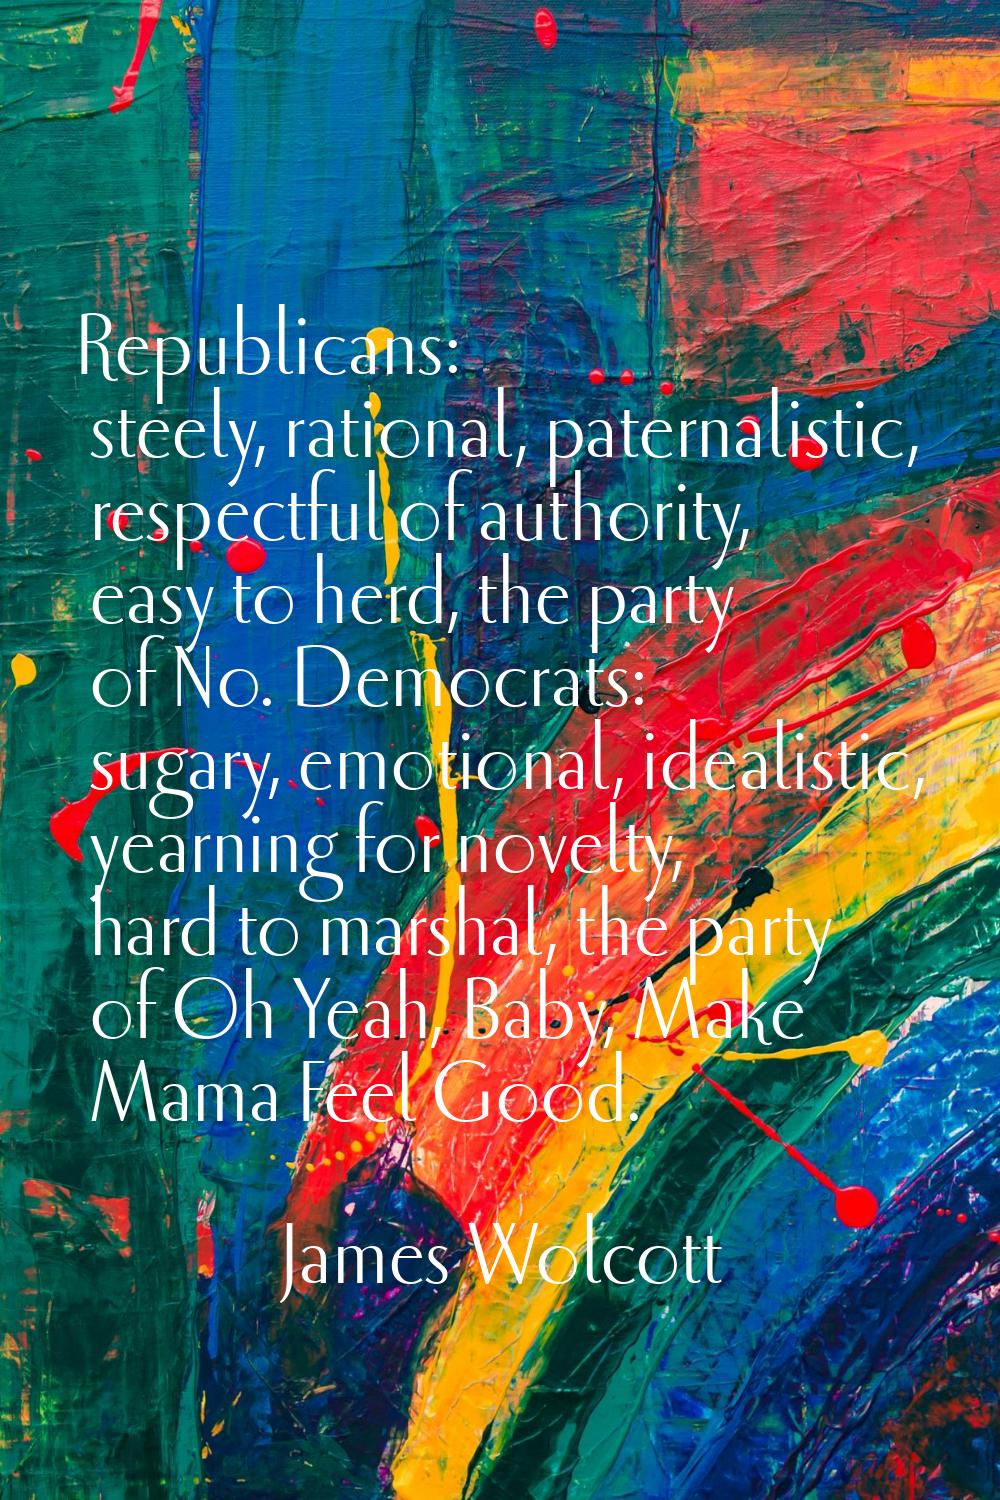 Republicans: steely, rational, paternalistic, respectful of authority, easy to herd, the party of N